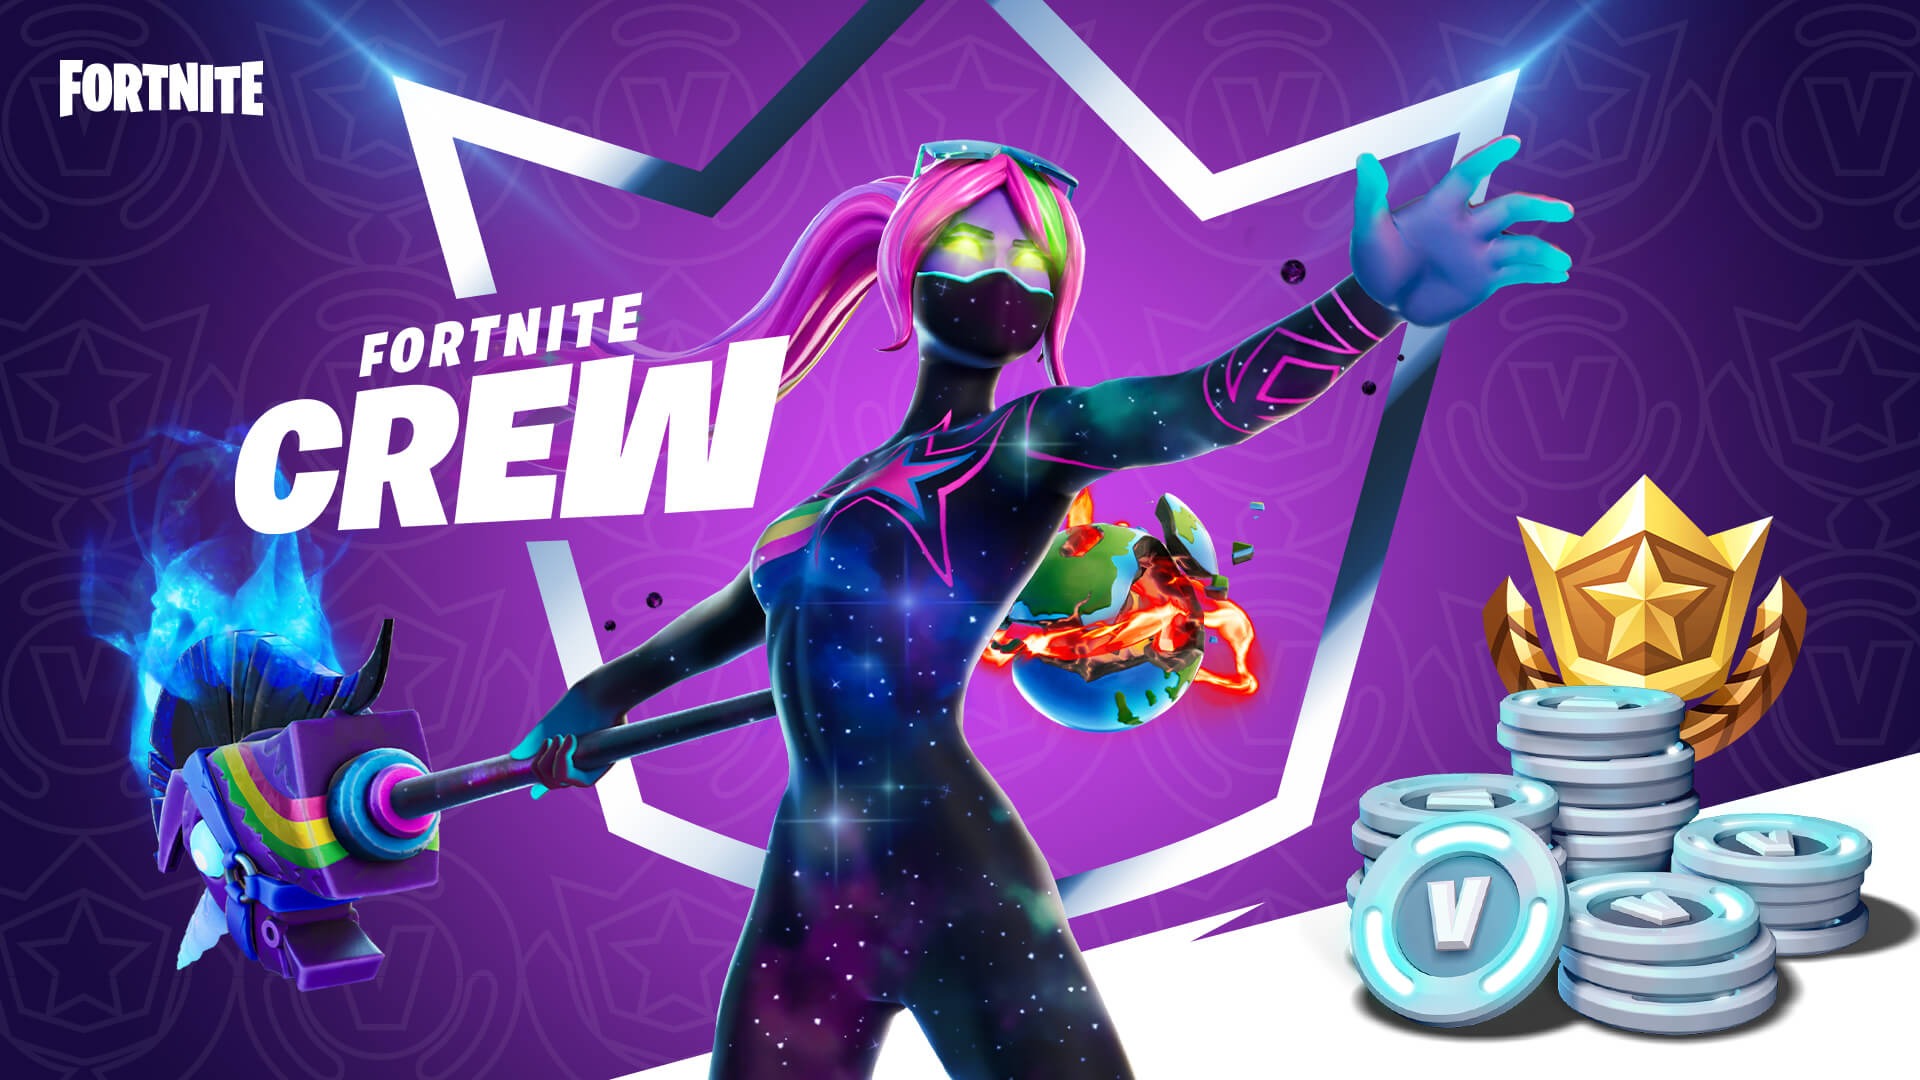 Galaxy Fortnite Skin Fortnite Goes Galactic With Space Themed Skin For New Subscription Service Launch Space